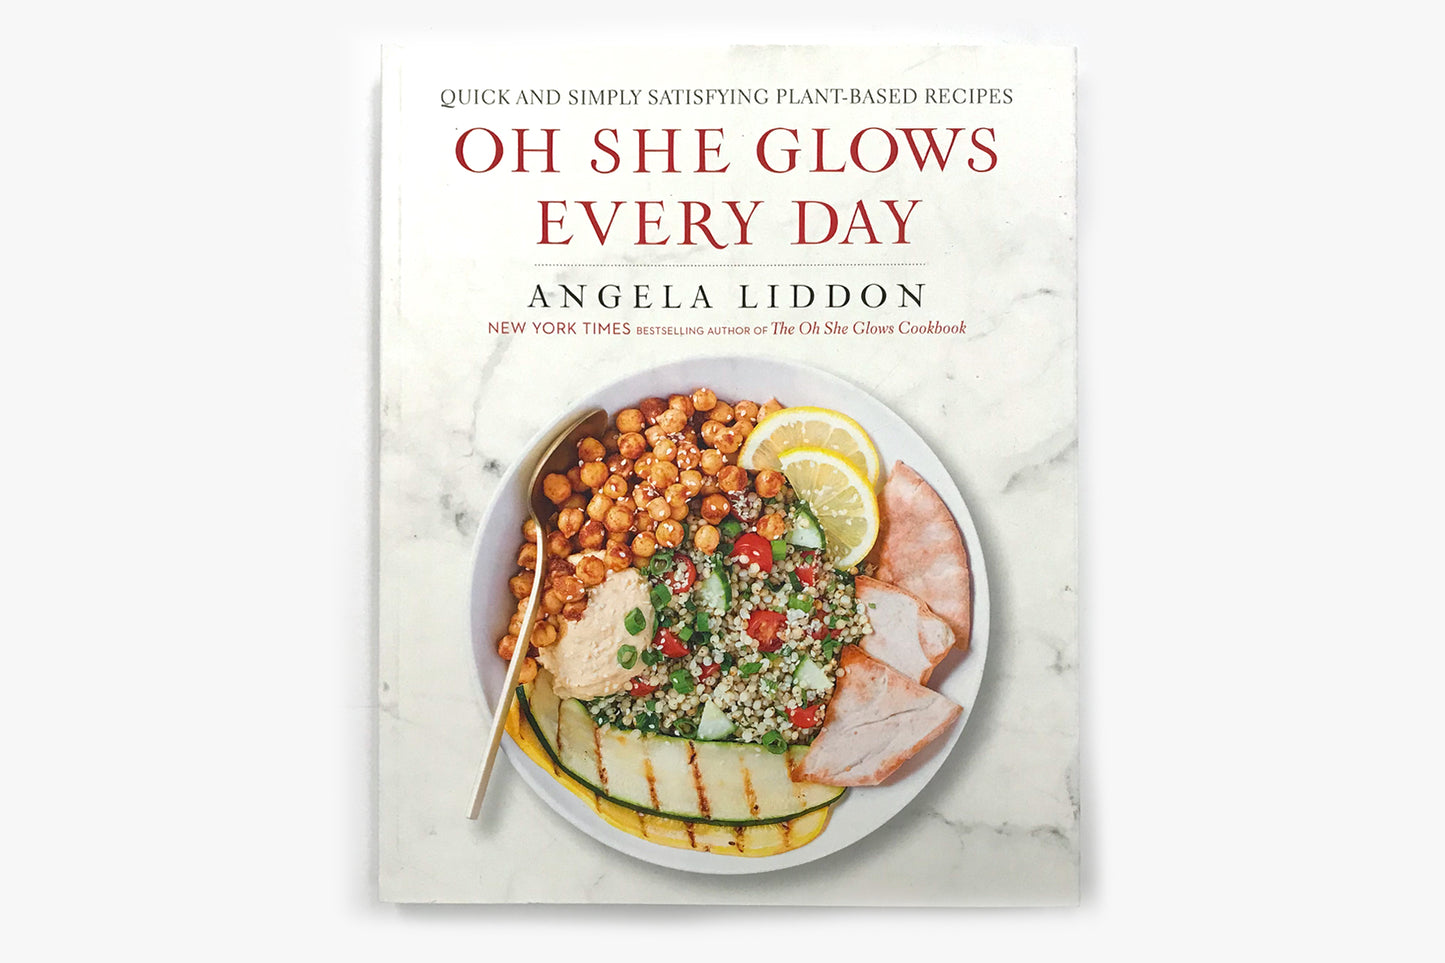 Oh She Glows Every Day by Angela Liddon